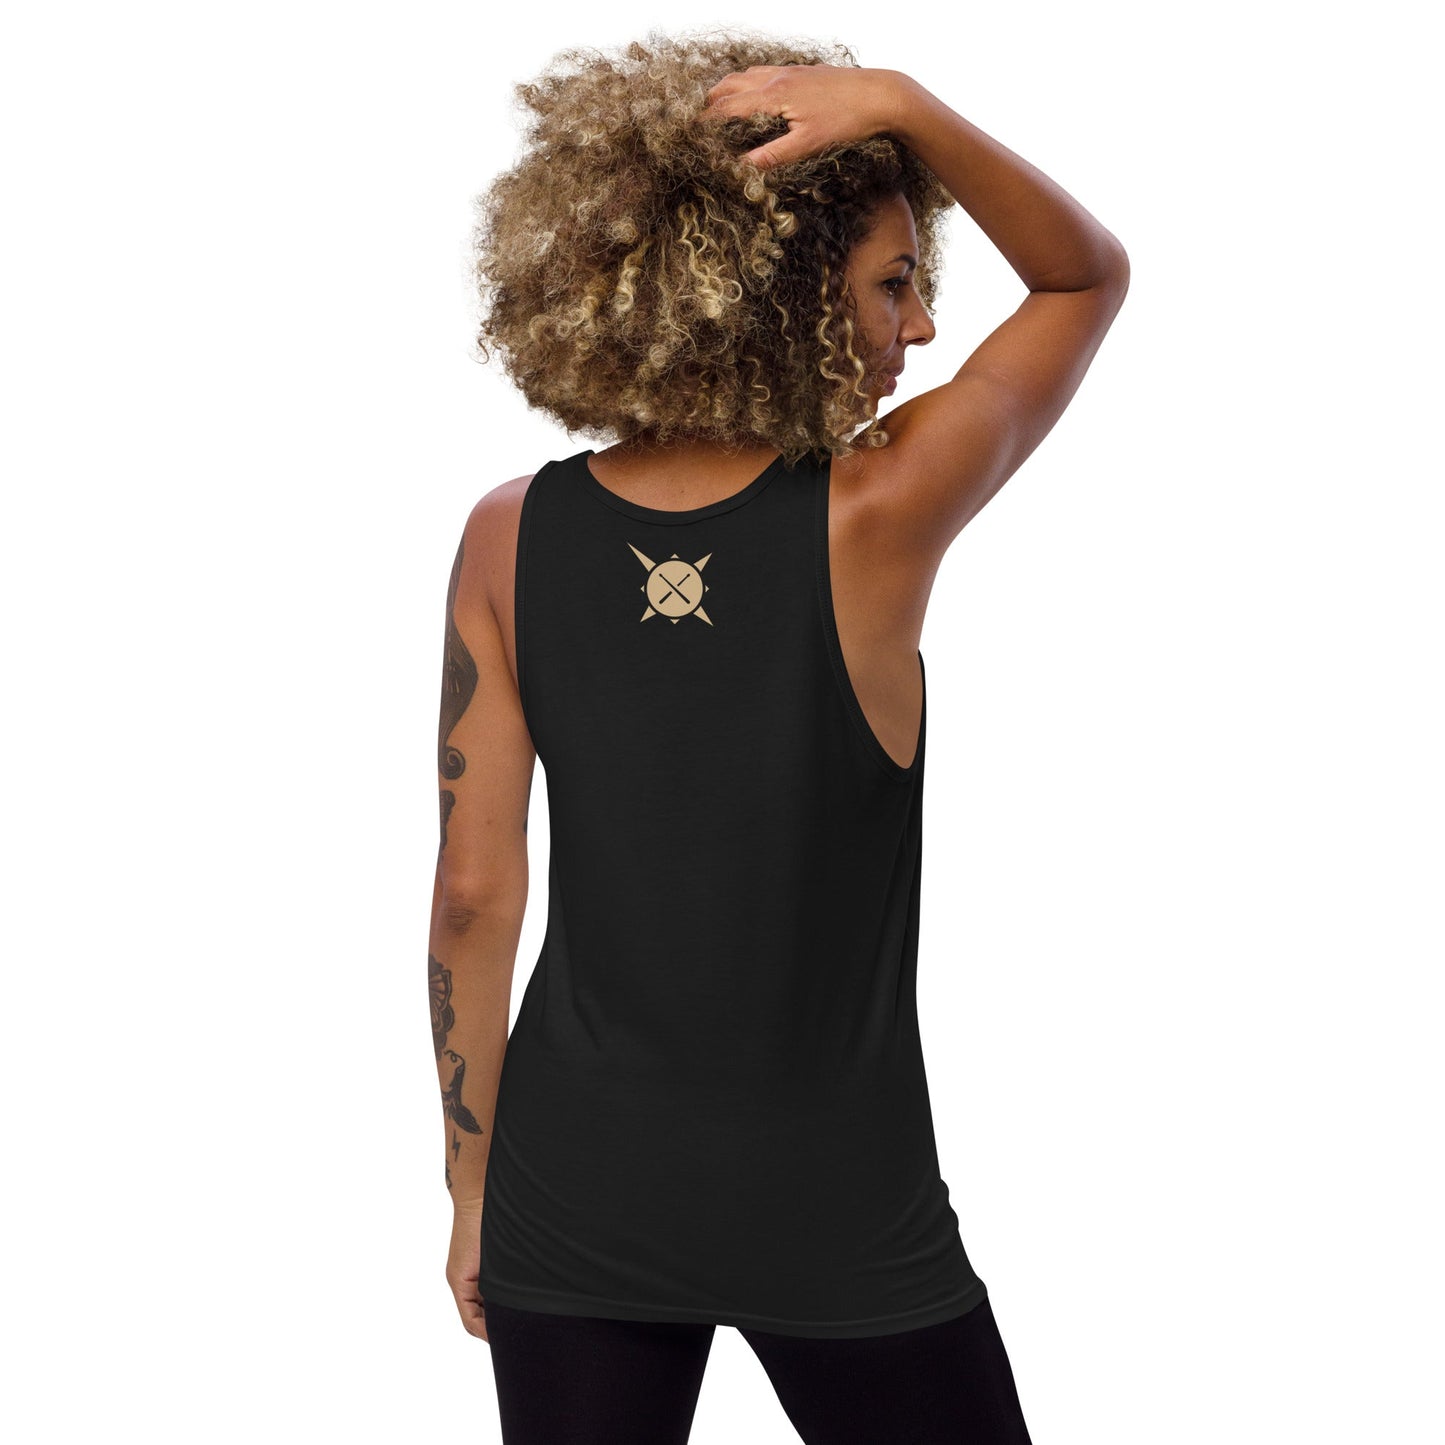 Drums of the Sun Men's Tank Top - BeExtra! Apparel & More